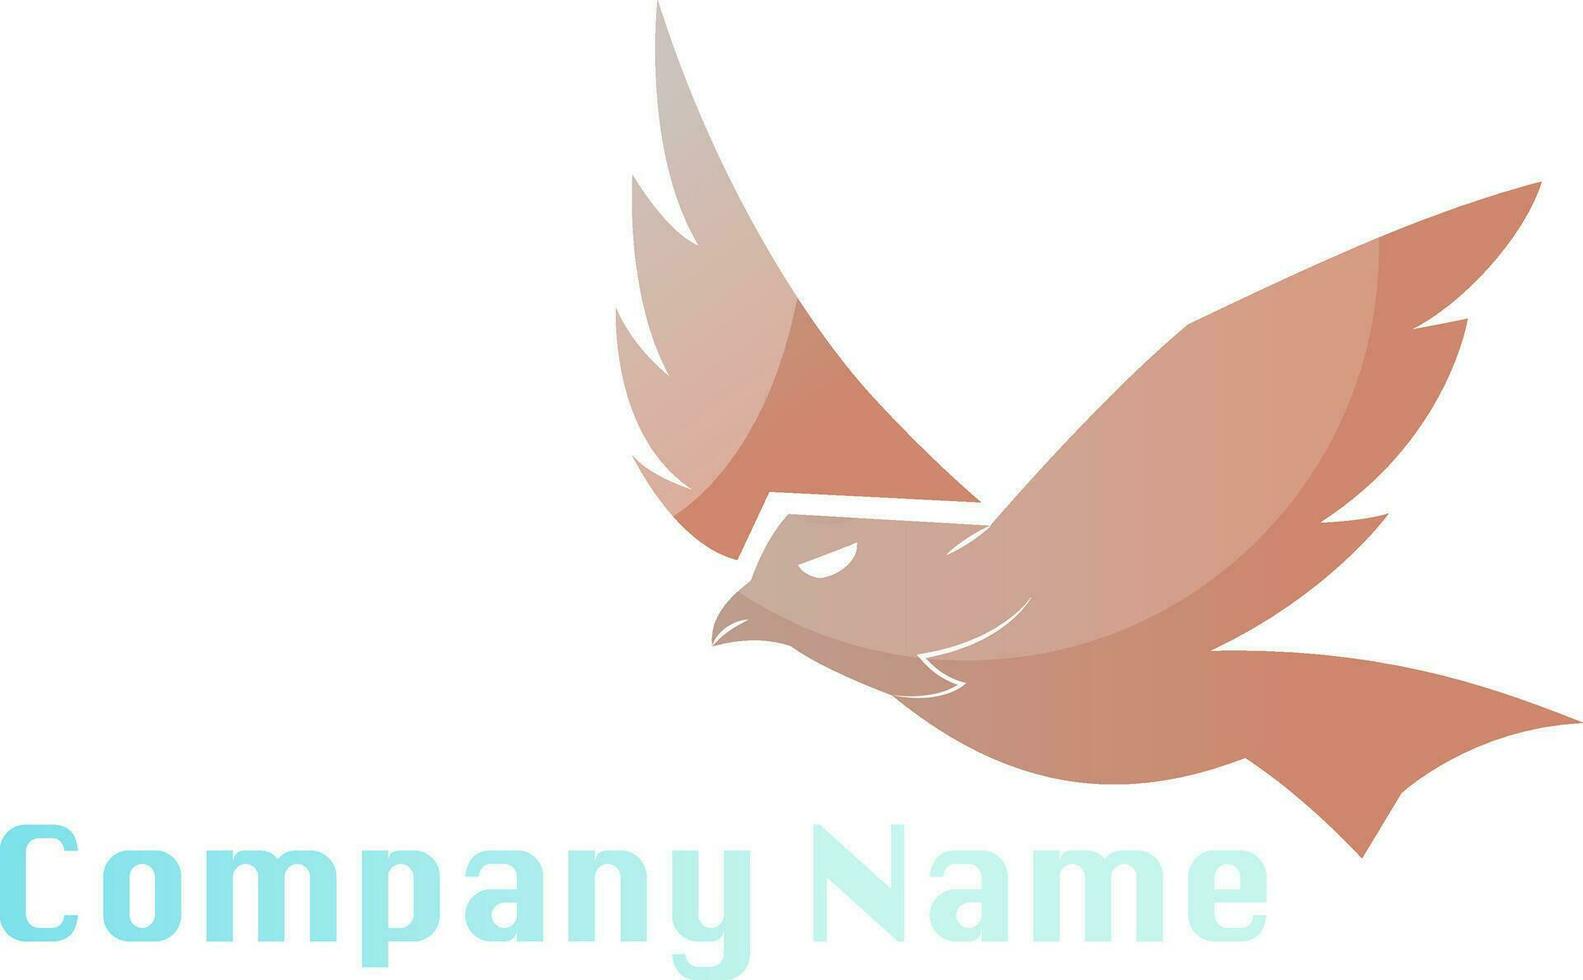 Simple vector logo design of a eagle flying on white background